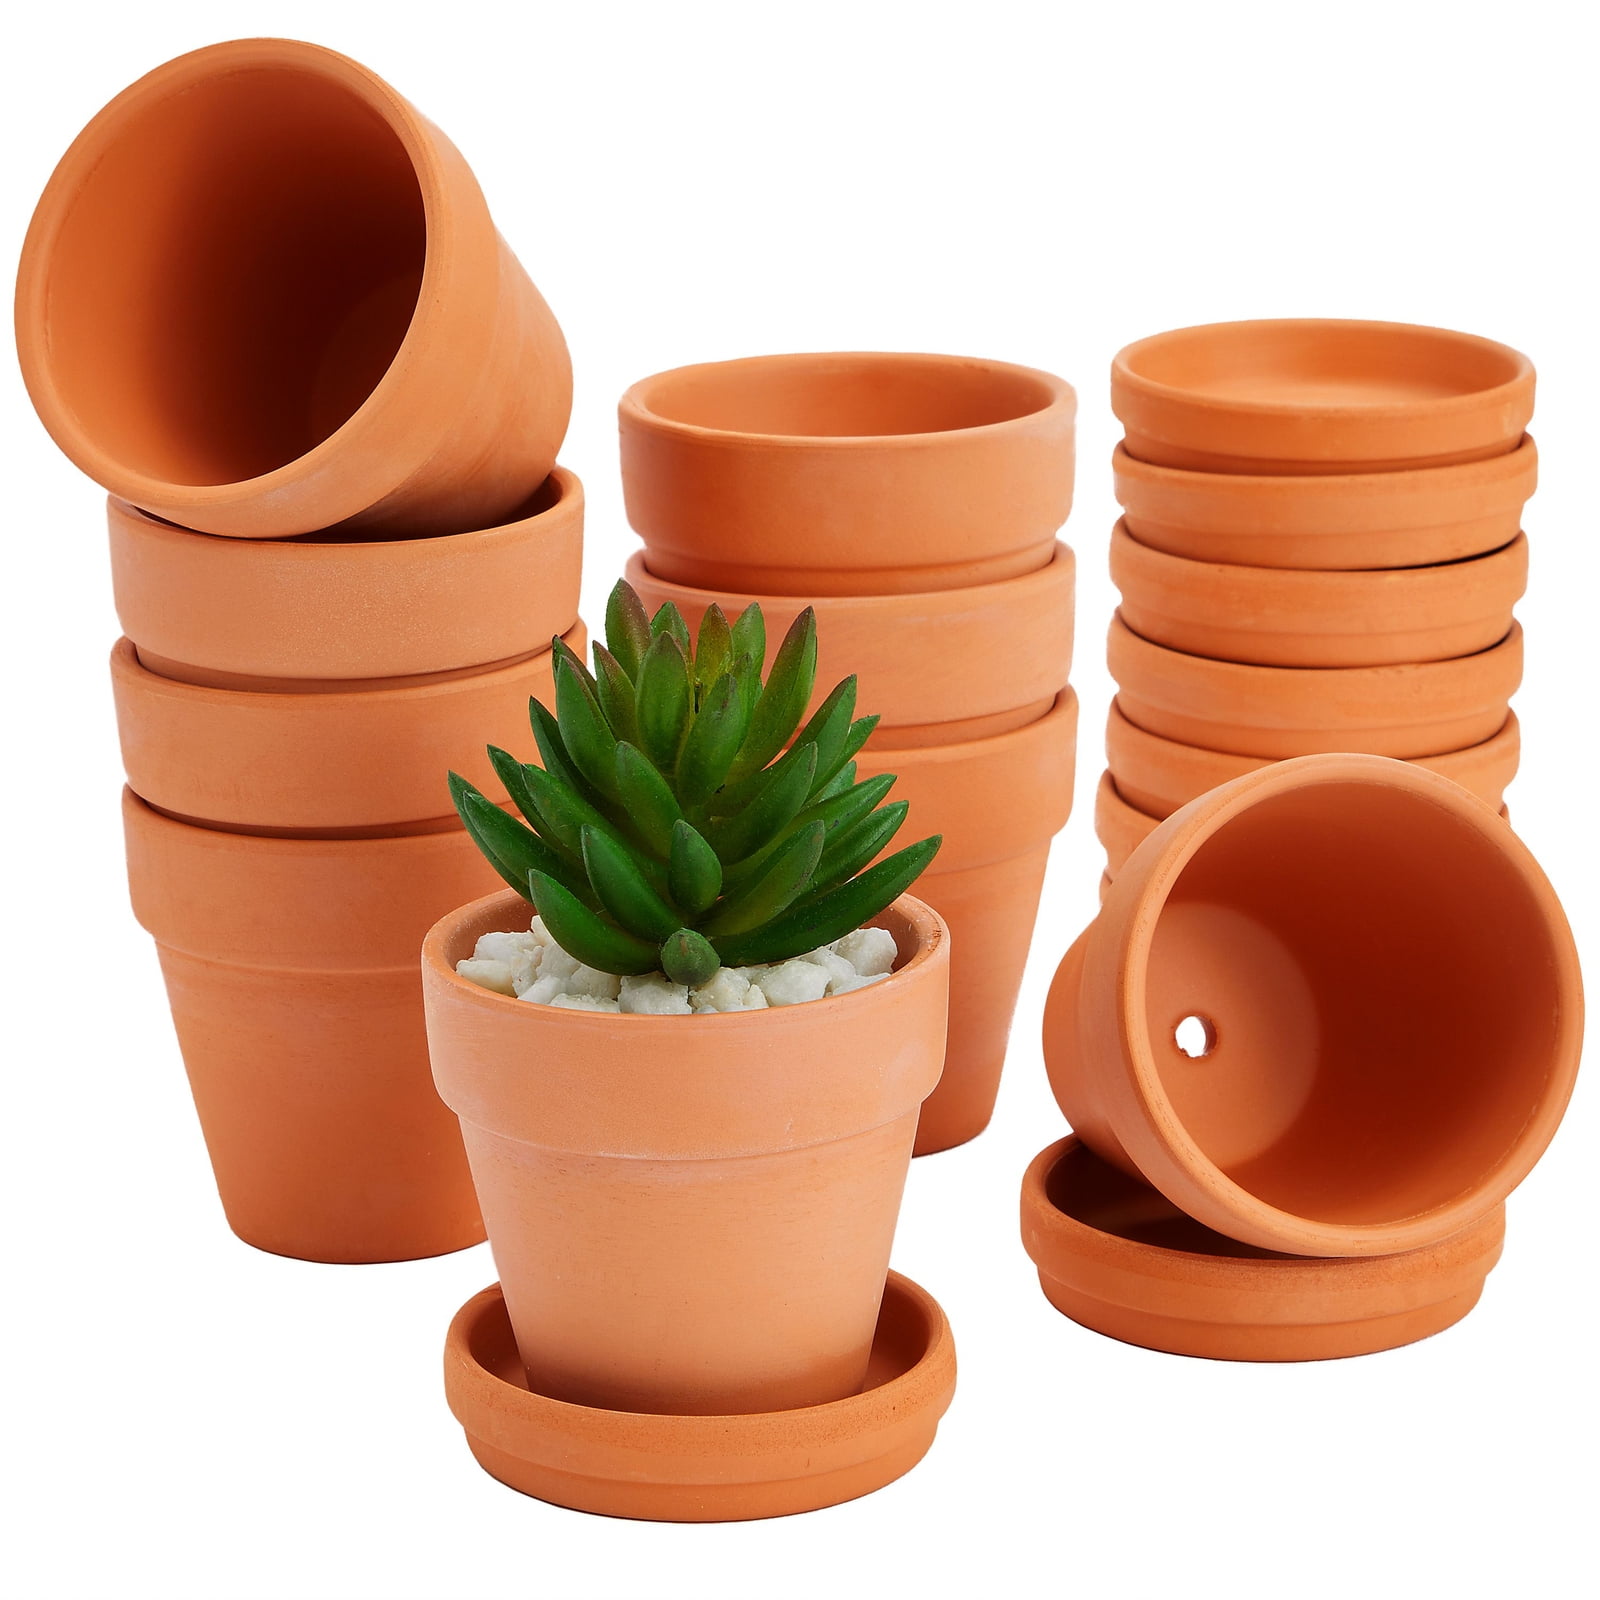 9 Pack Small Terracotta Pots with Saucers for Succulents, Clay Flower  Planters with Drainage Holes for Indoor, Outdoor Plants, Cactus, Crafts, 3  inch 